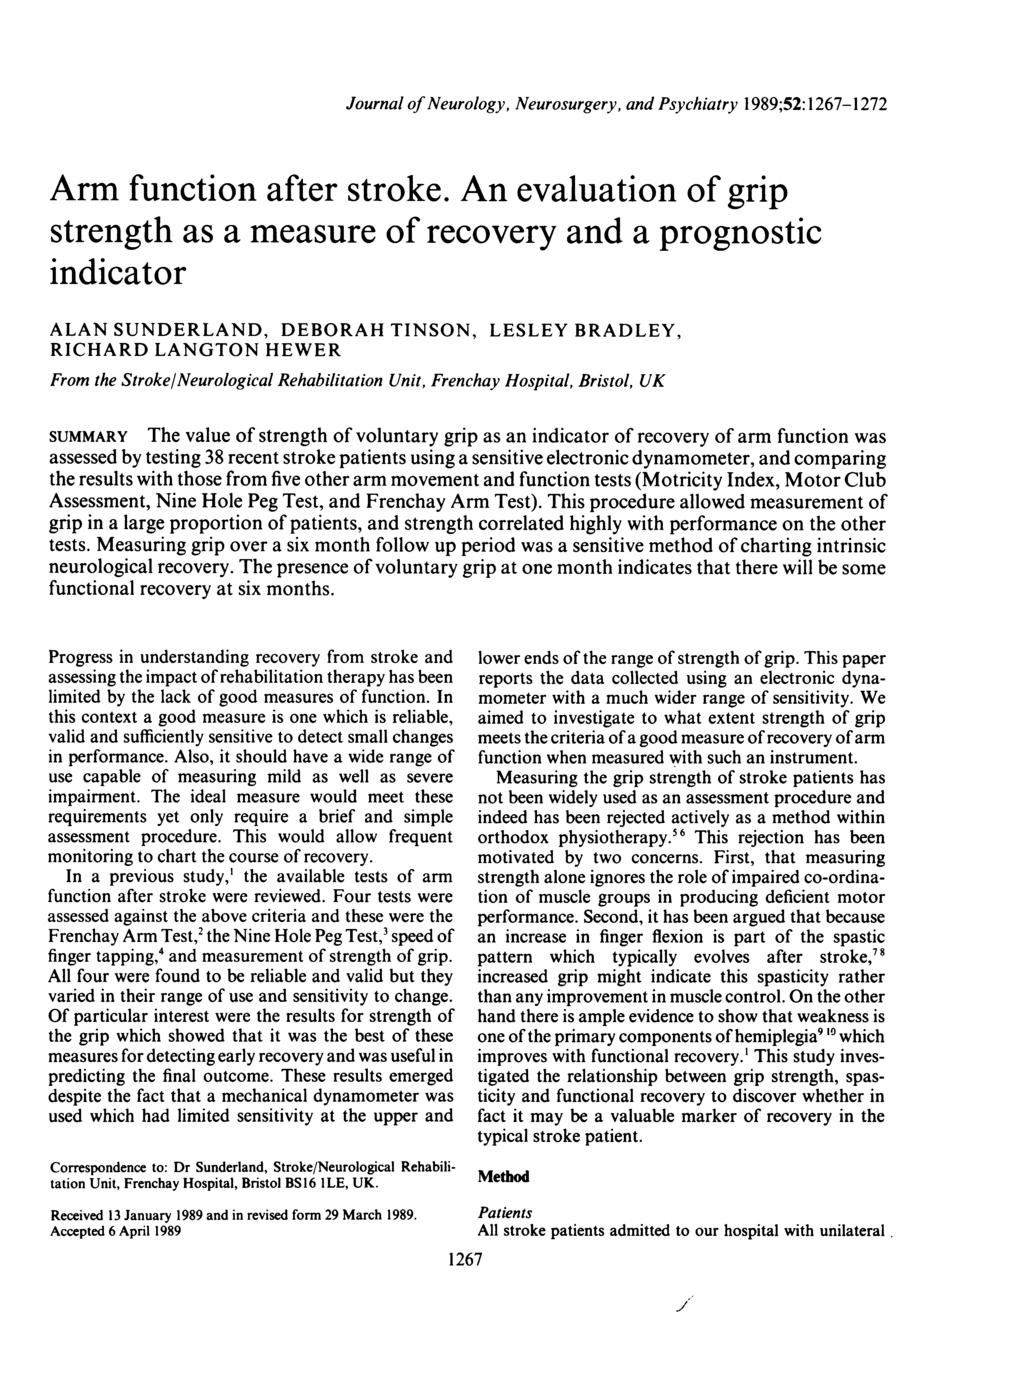 Journal of Neurology, Neurosurgery, and Psychiatry 1989;52:1267-1272 Arm function after stroke.